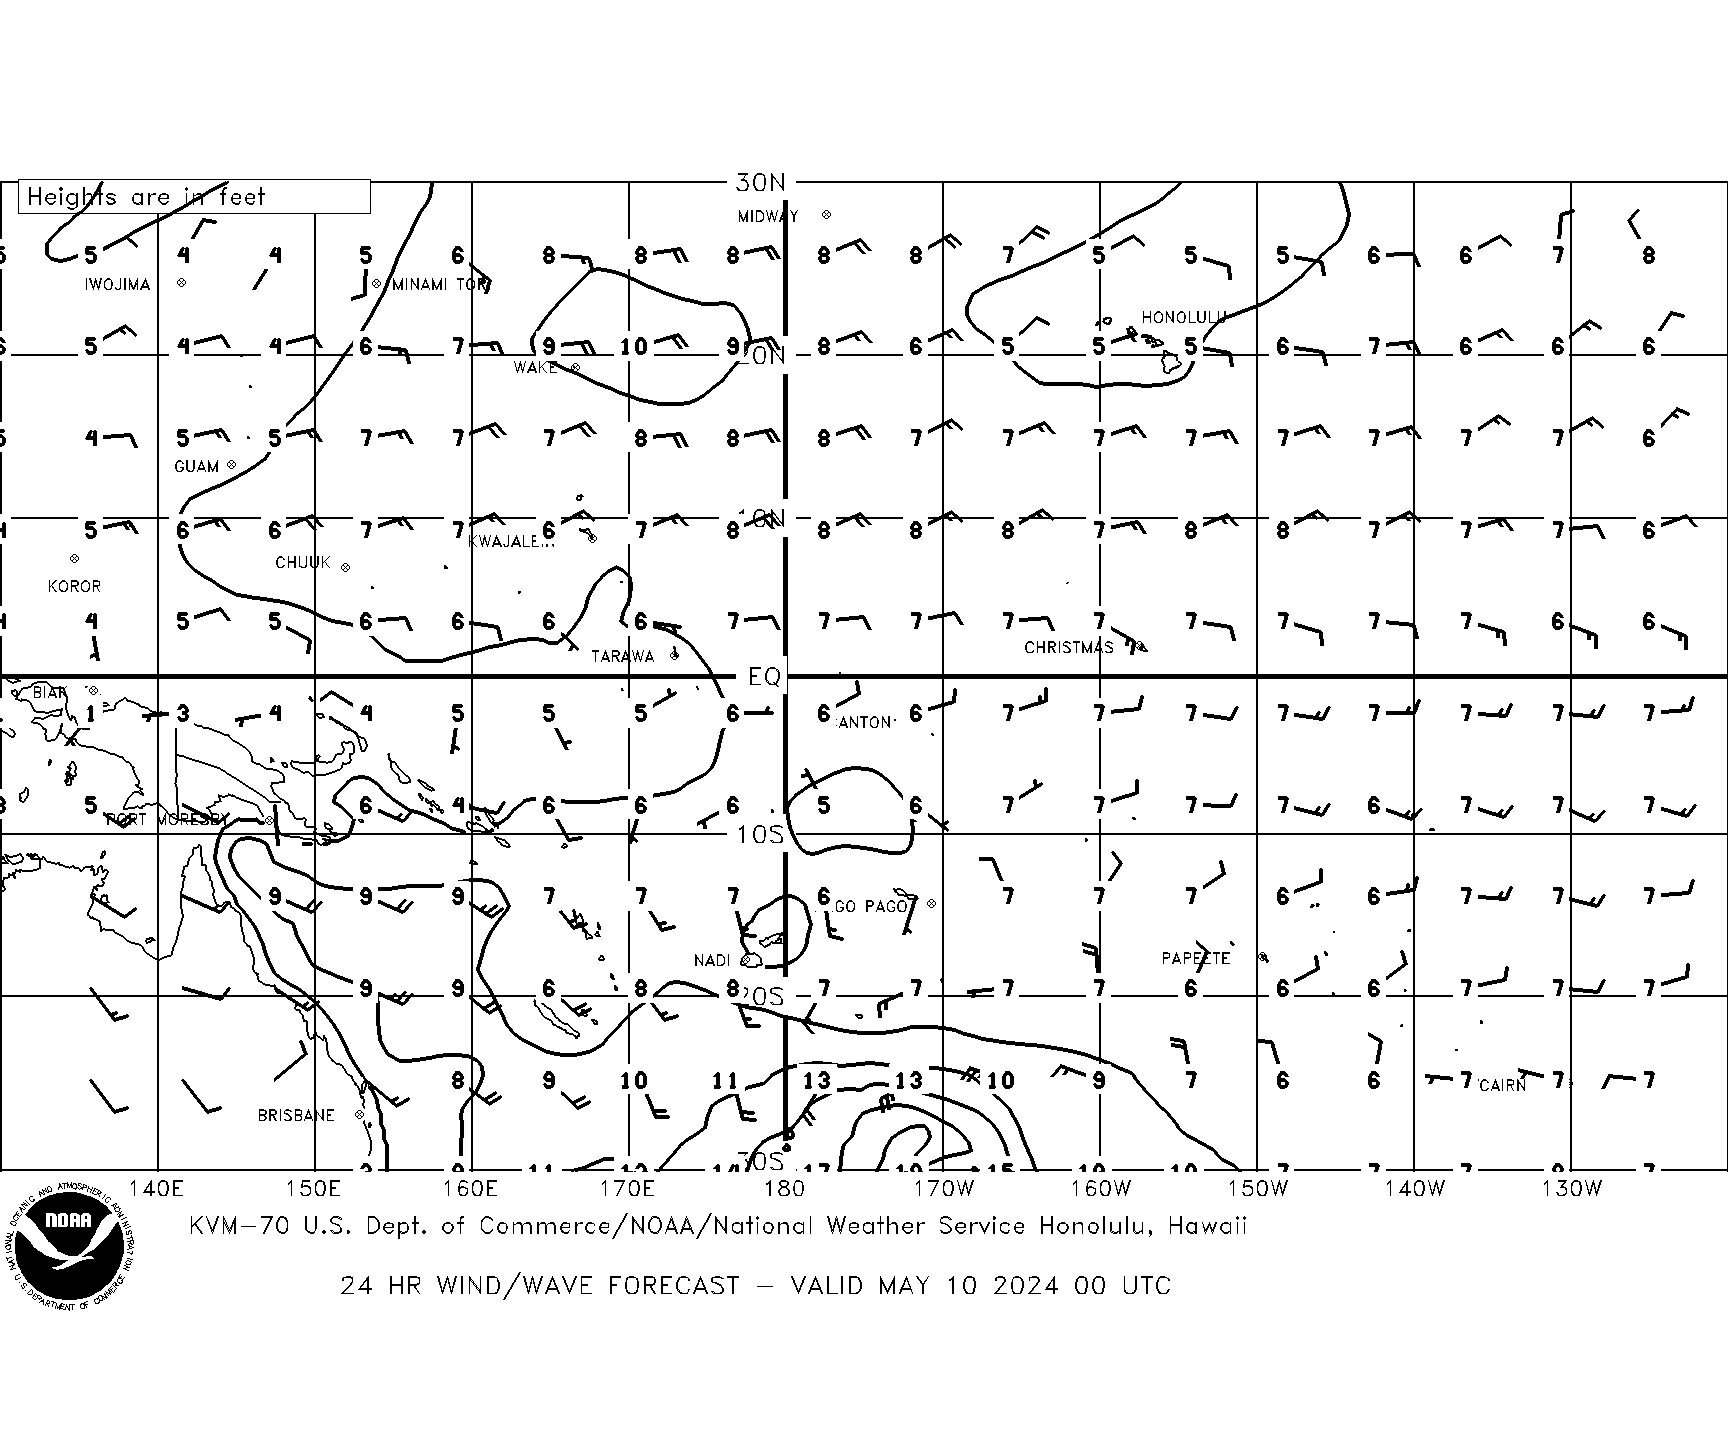 24 HR Pacific Sea State Forecast